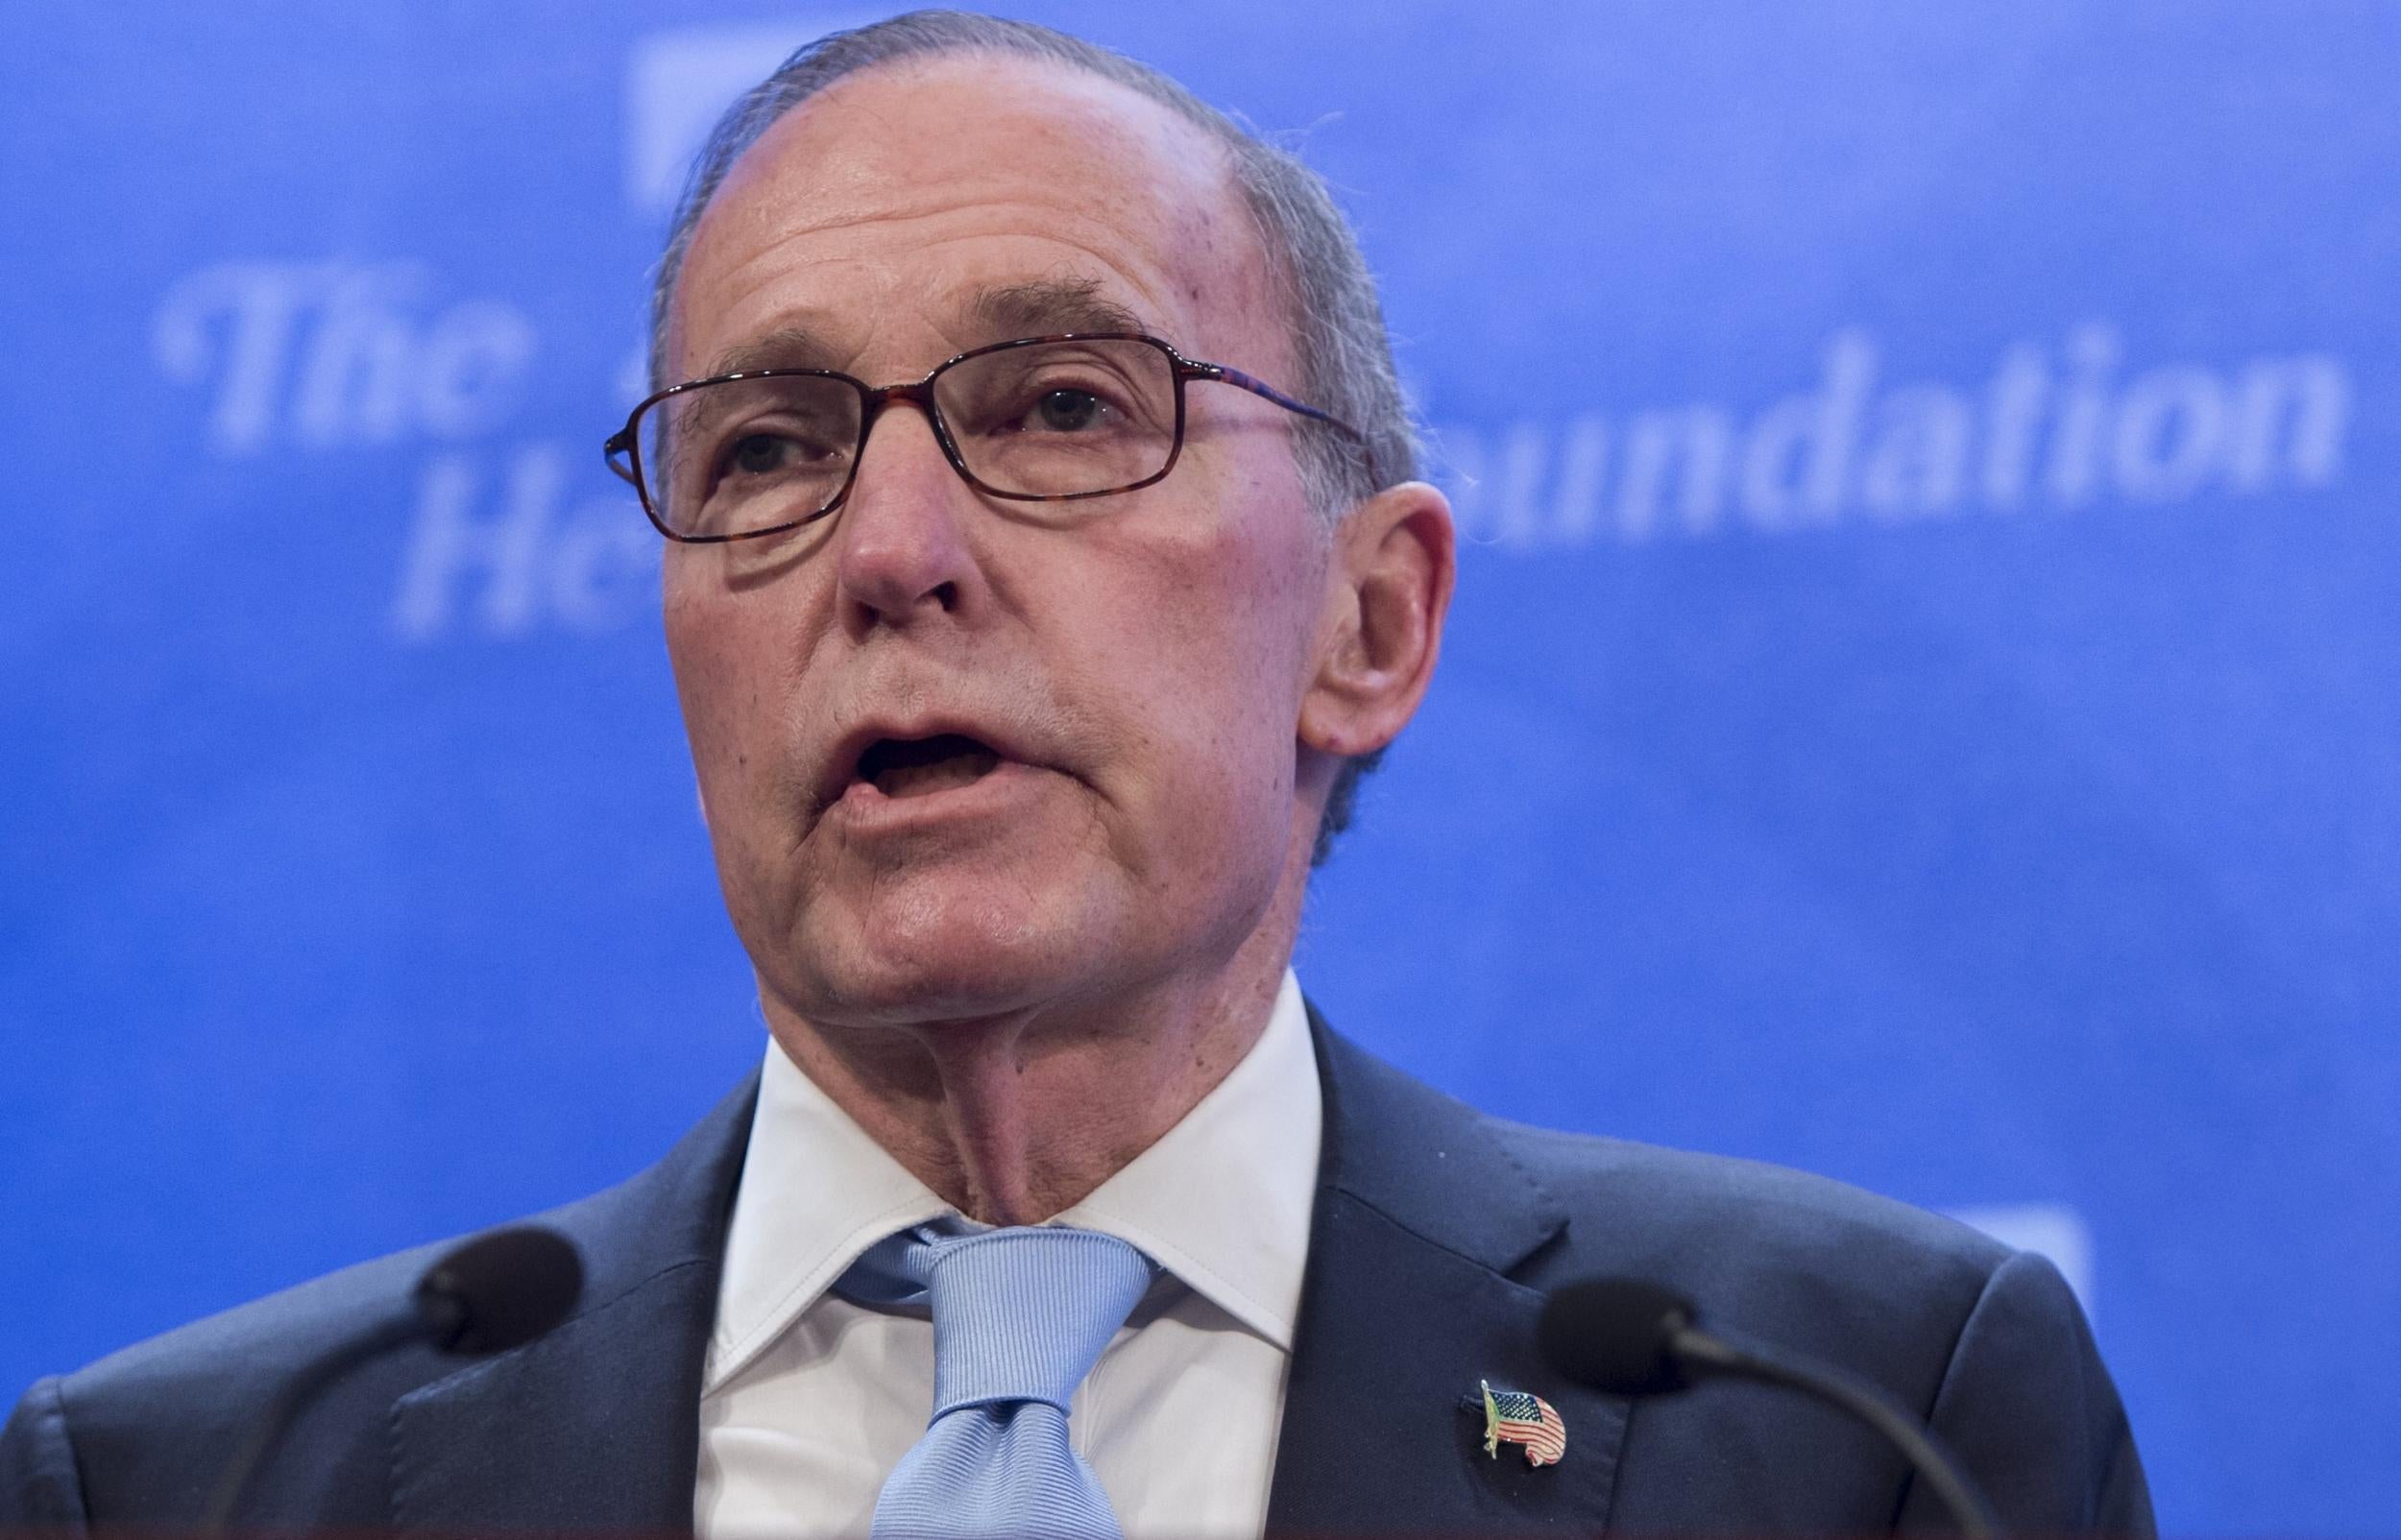 Mr Kudlow says that the tariffs may not even be implemented